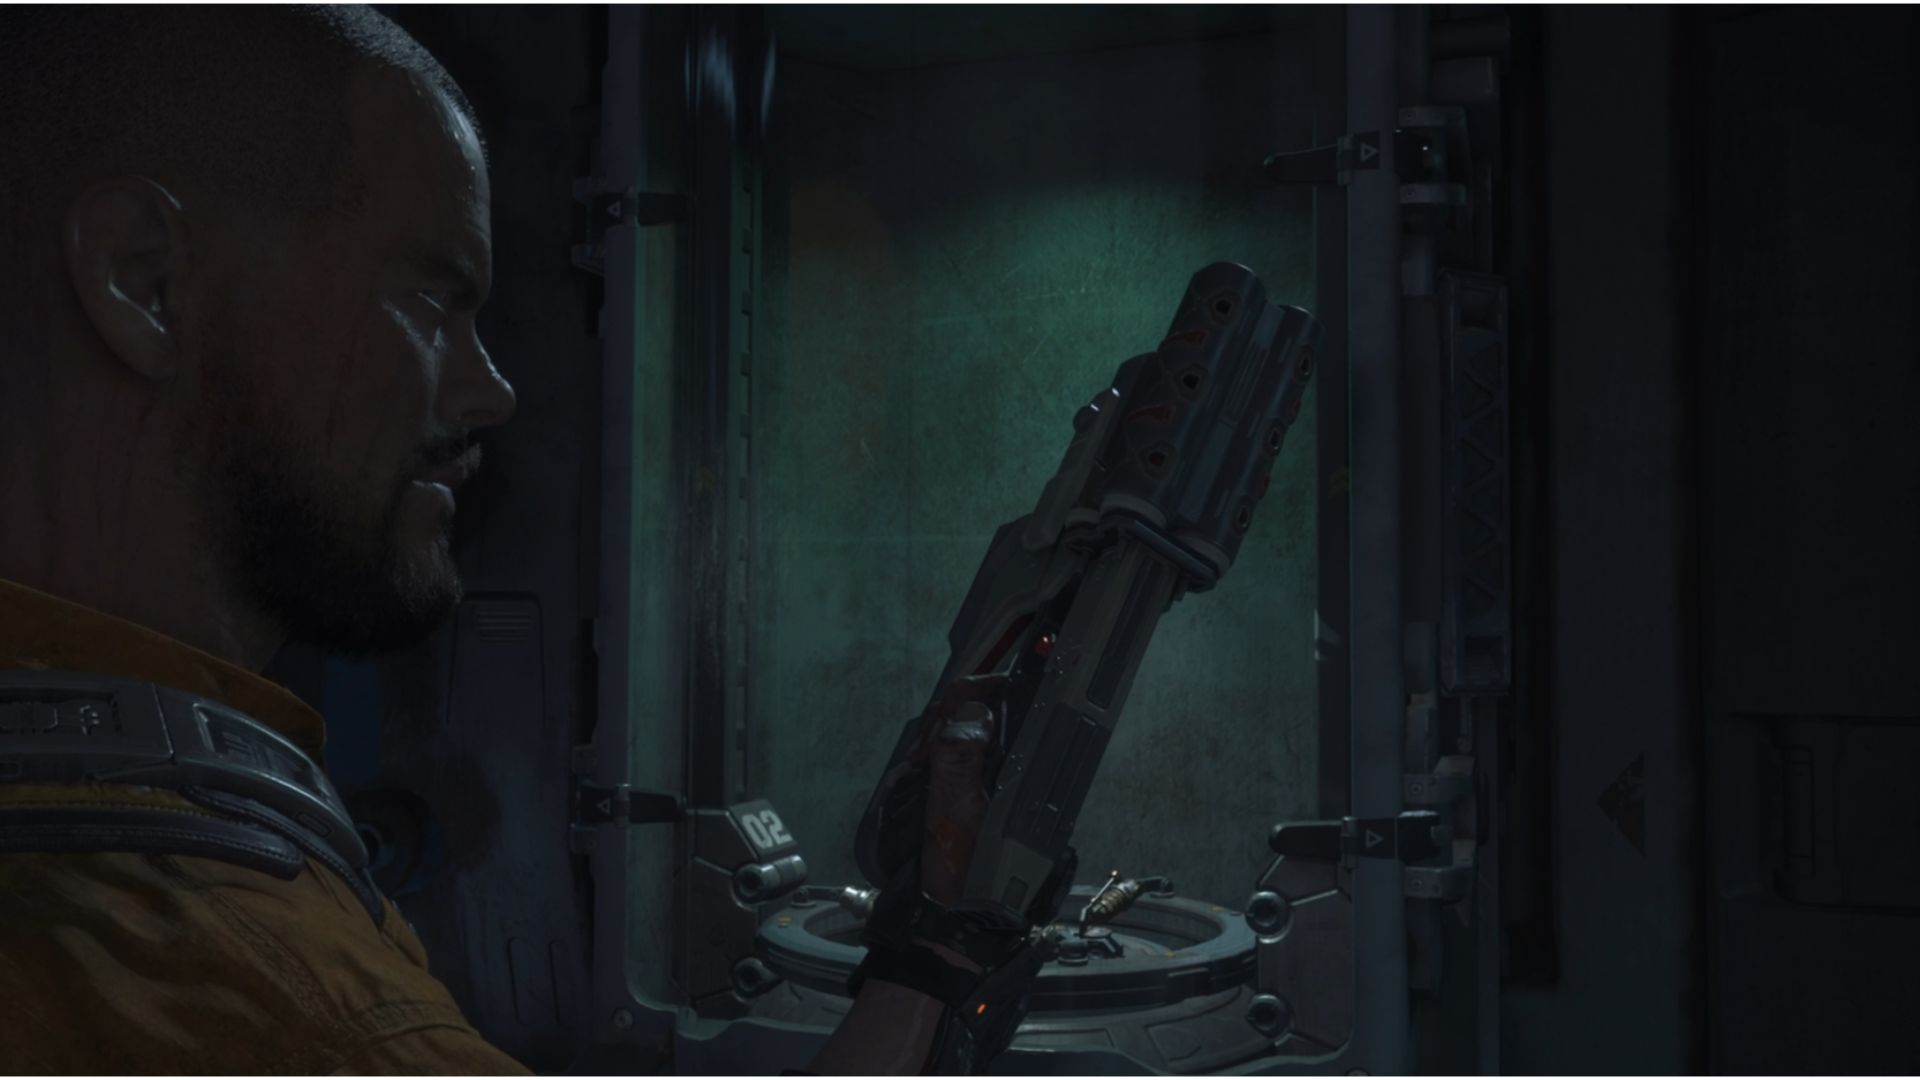 The Callisto Protocol Weapons: Jacob can be seen with the Skunk Gun